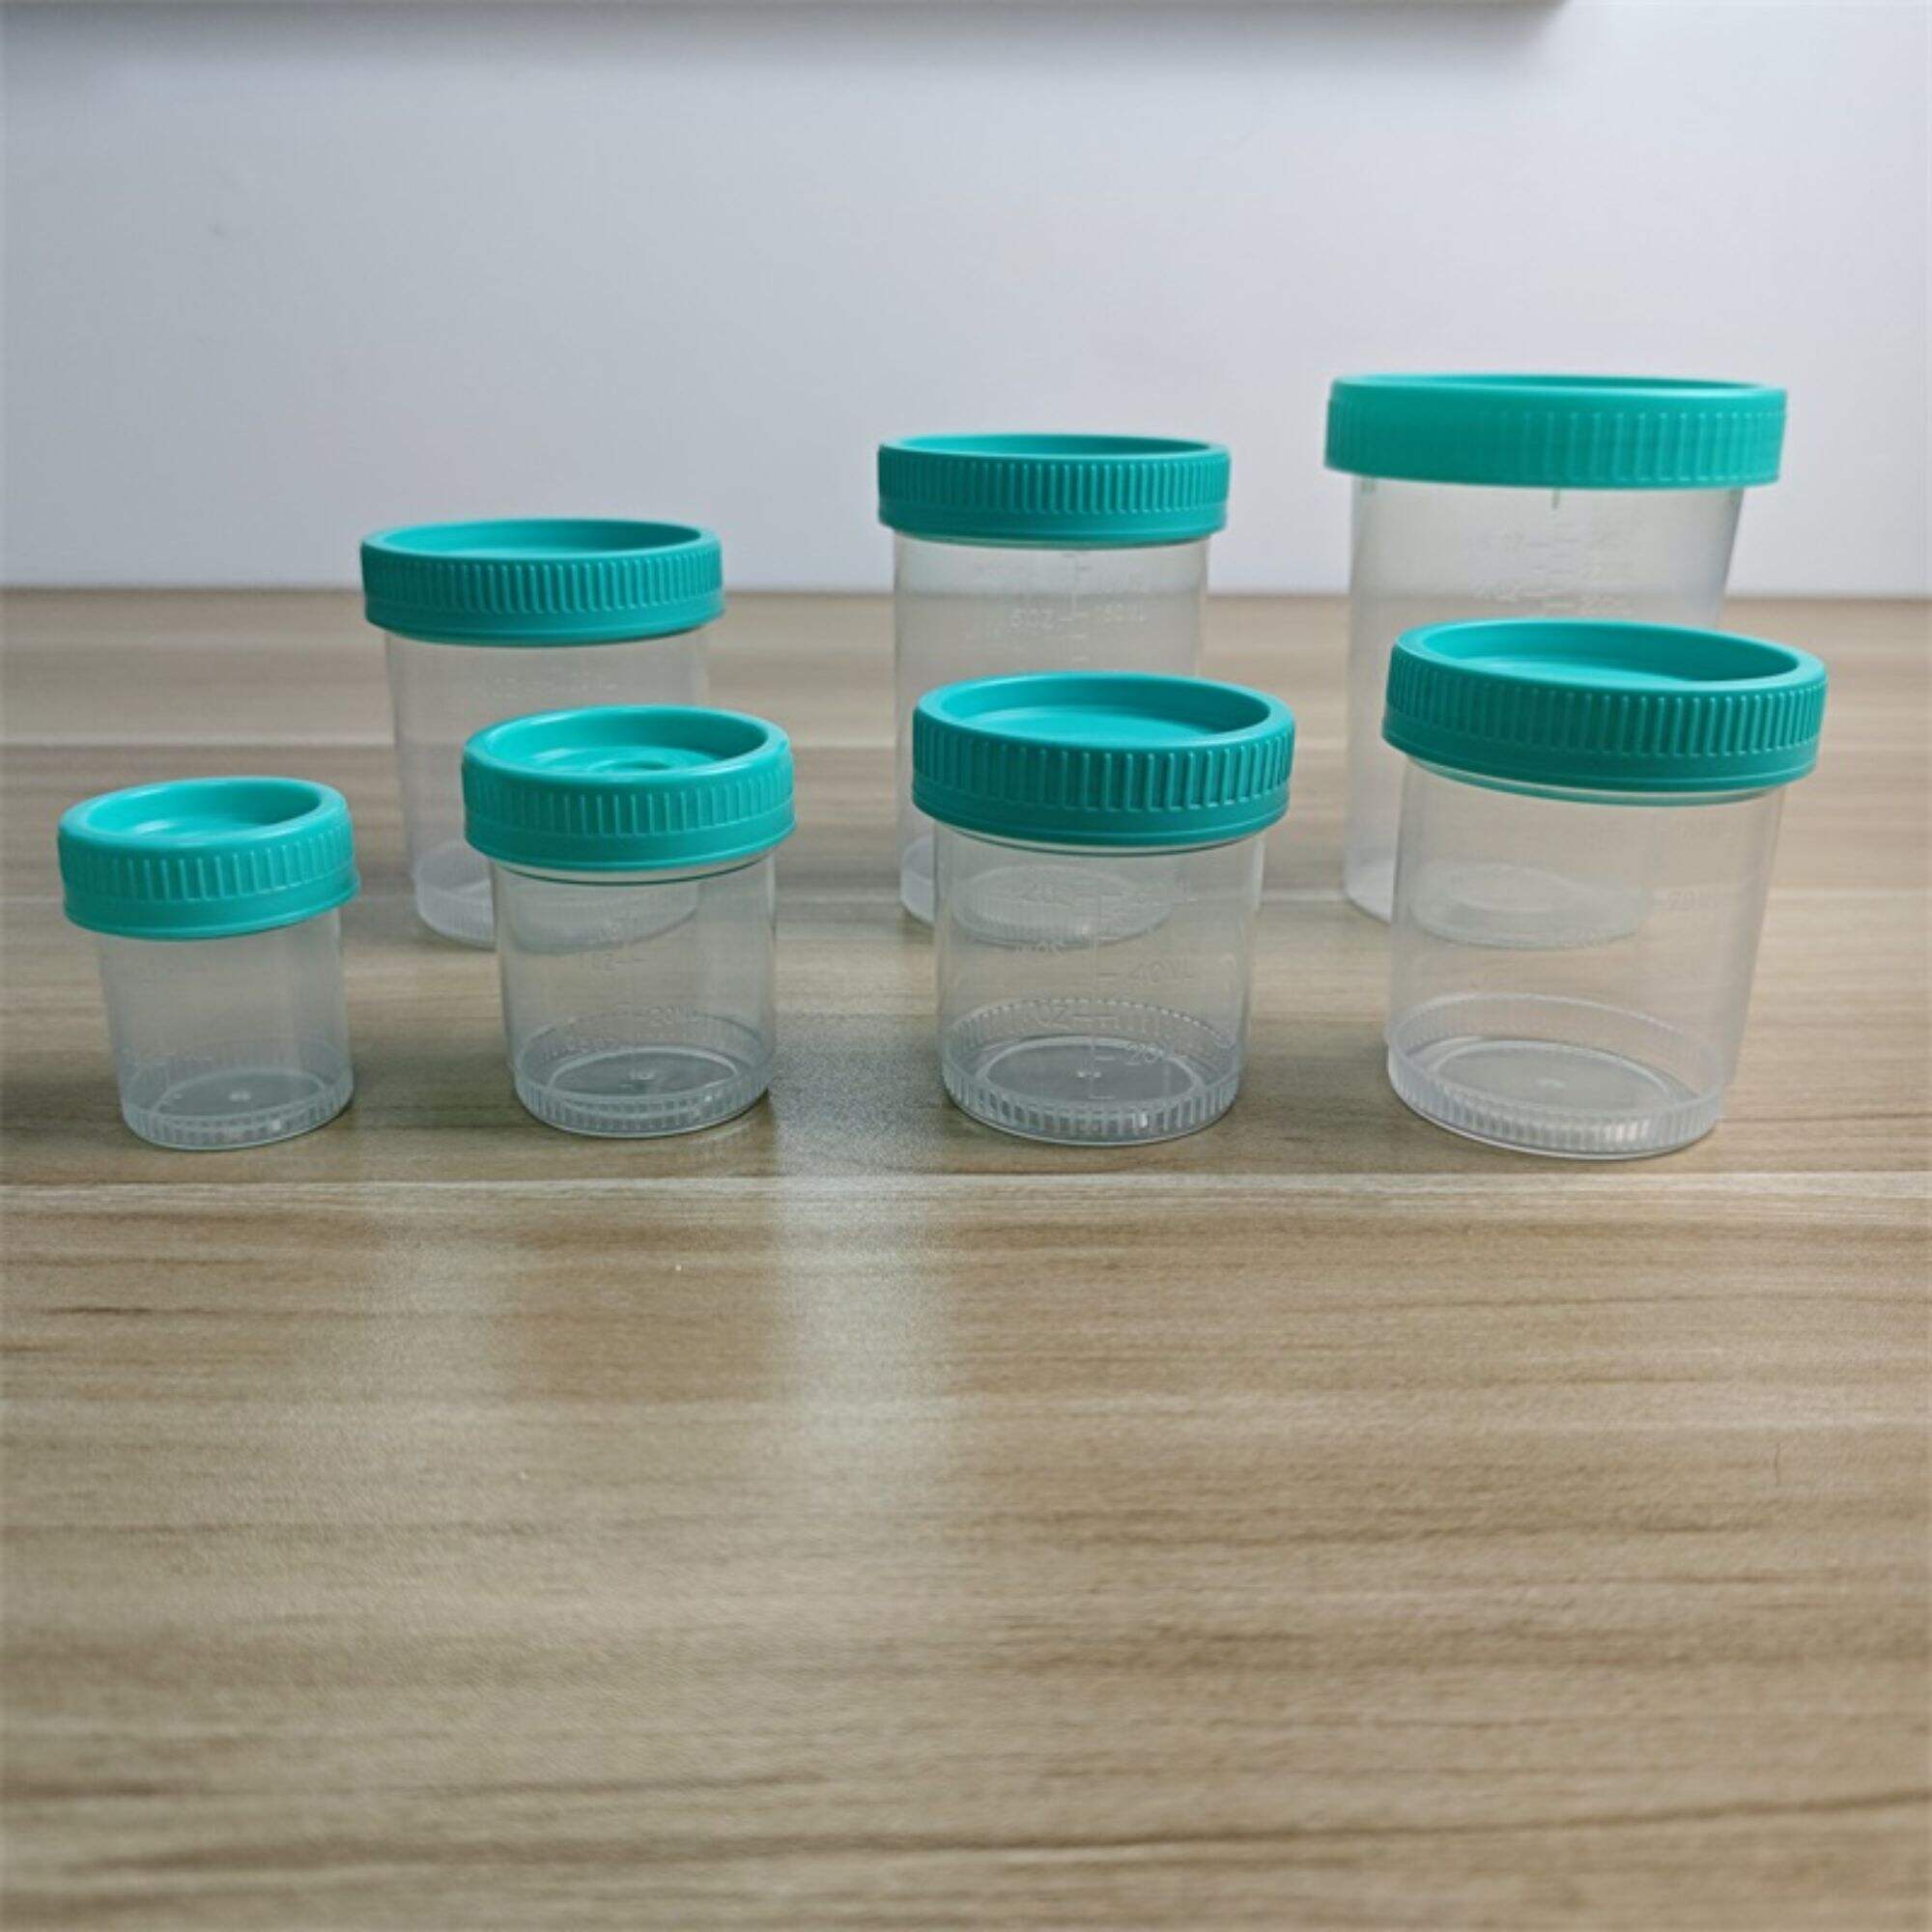 20ml/40ml/60ml/80ml/90ml/100ml/120ml/160ml/250mlnegative pressure hospital sterile test pots collection collector specimen bottles container urine sample cup vacuum urine cup 